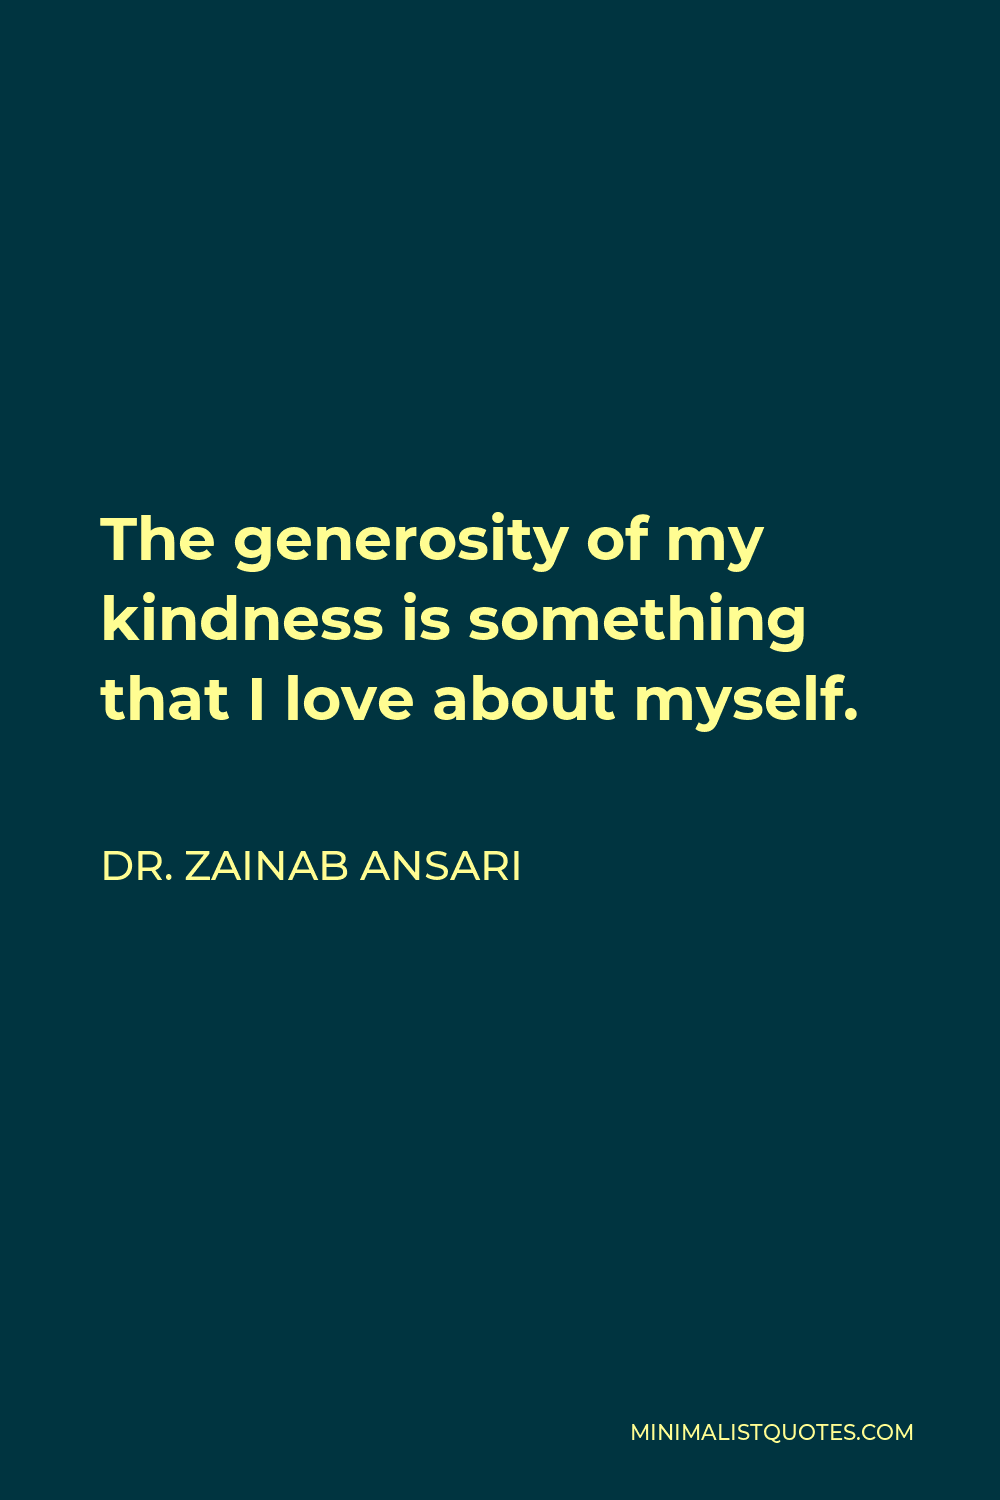 Dr. Zainab Ansari Quote - The generosity of my kindness is something that I love about myself.